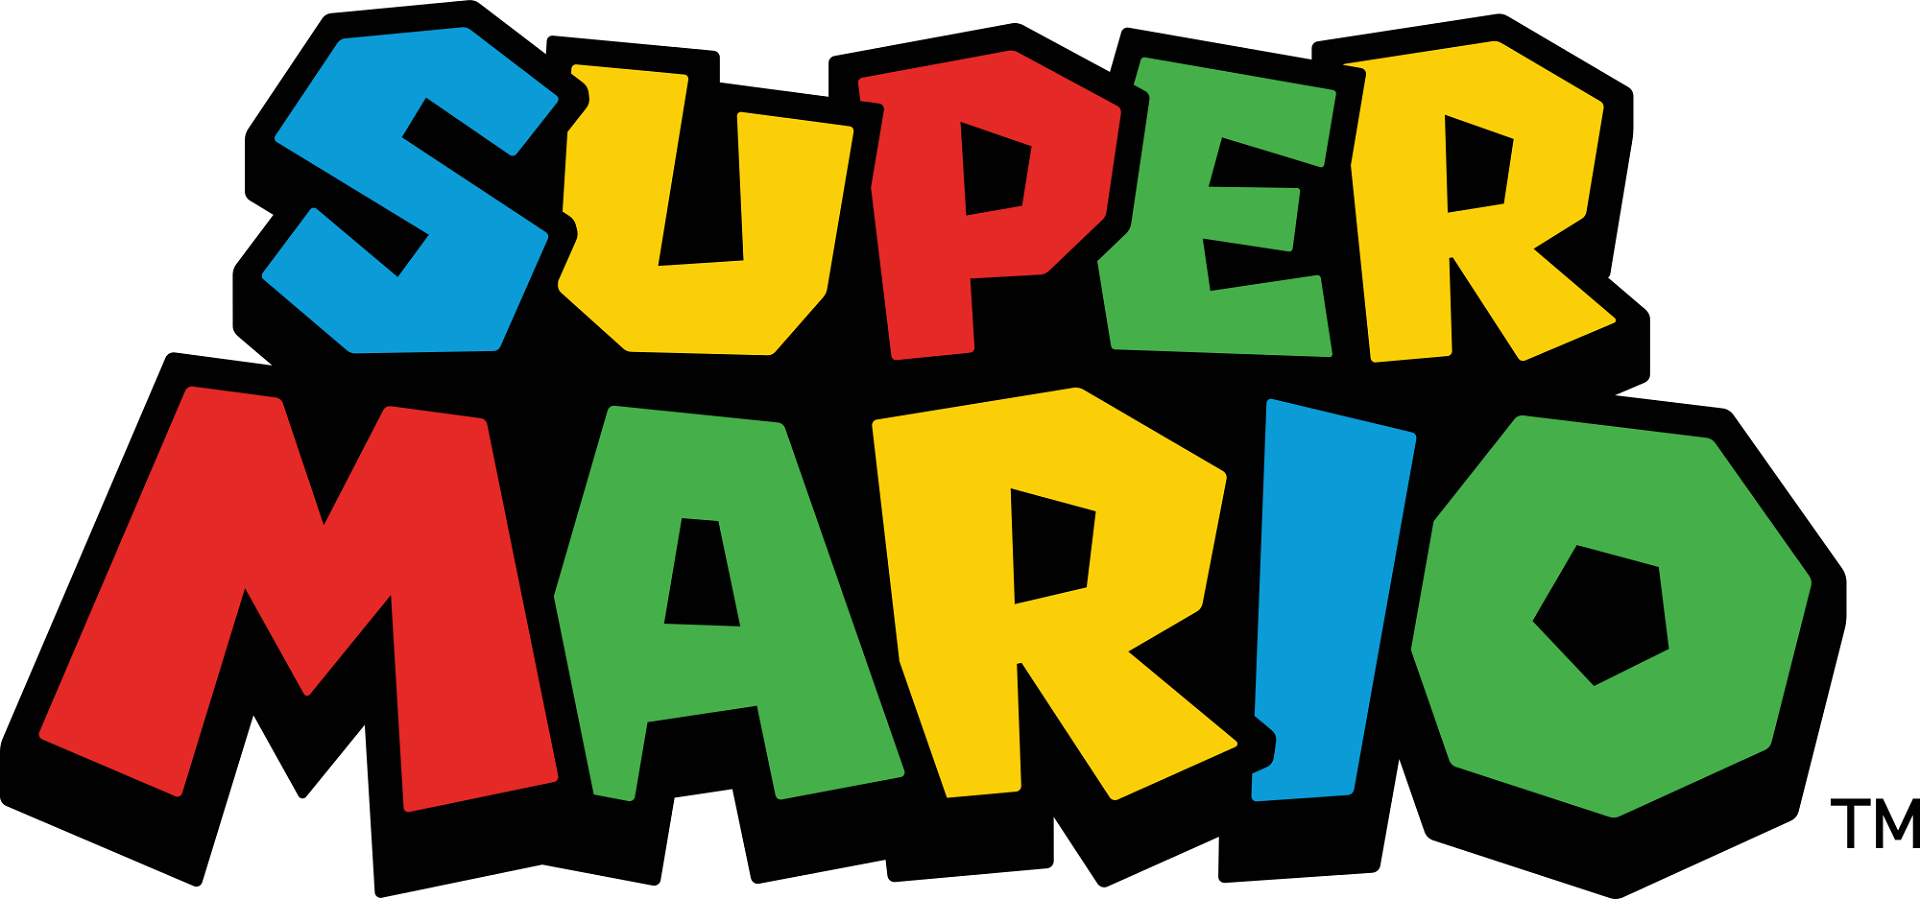 The Top 5 Super Mario Brothers Characters